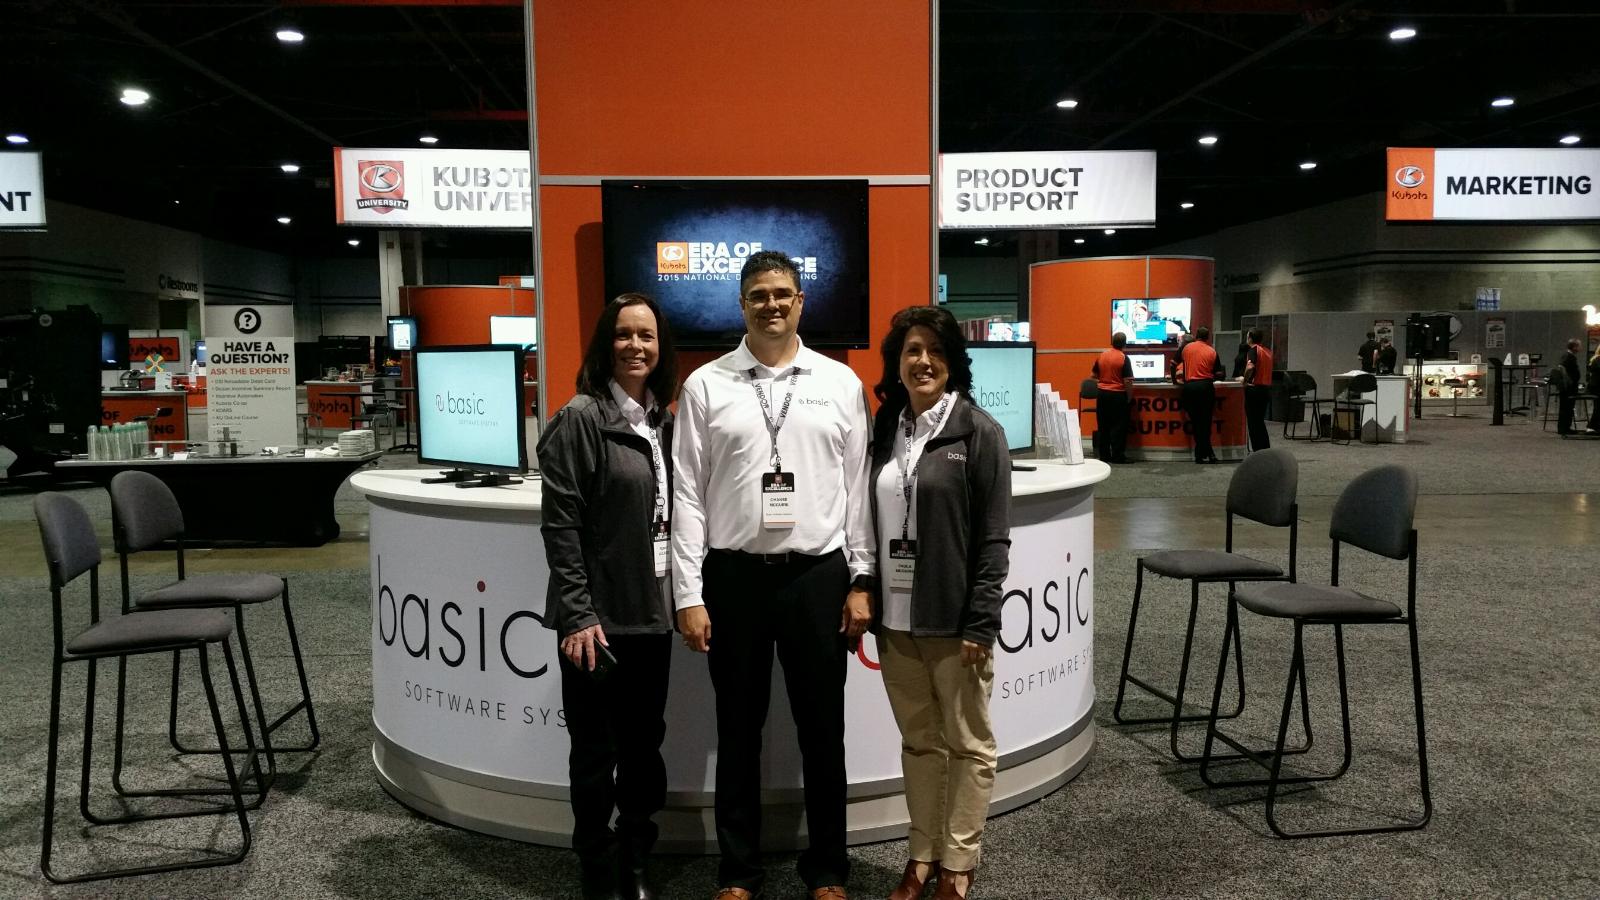 Team at Booth